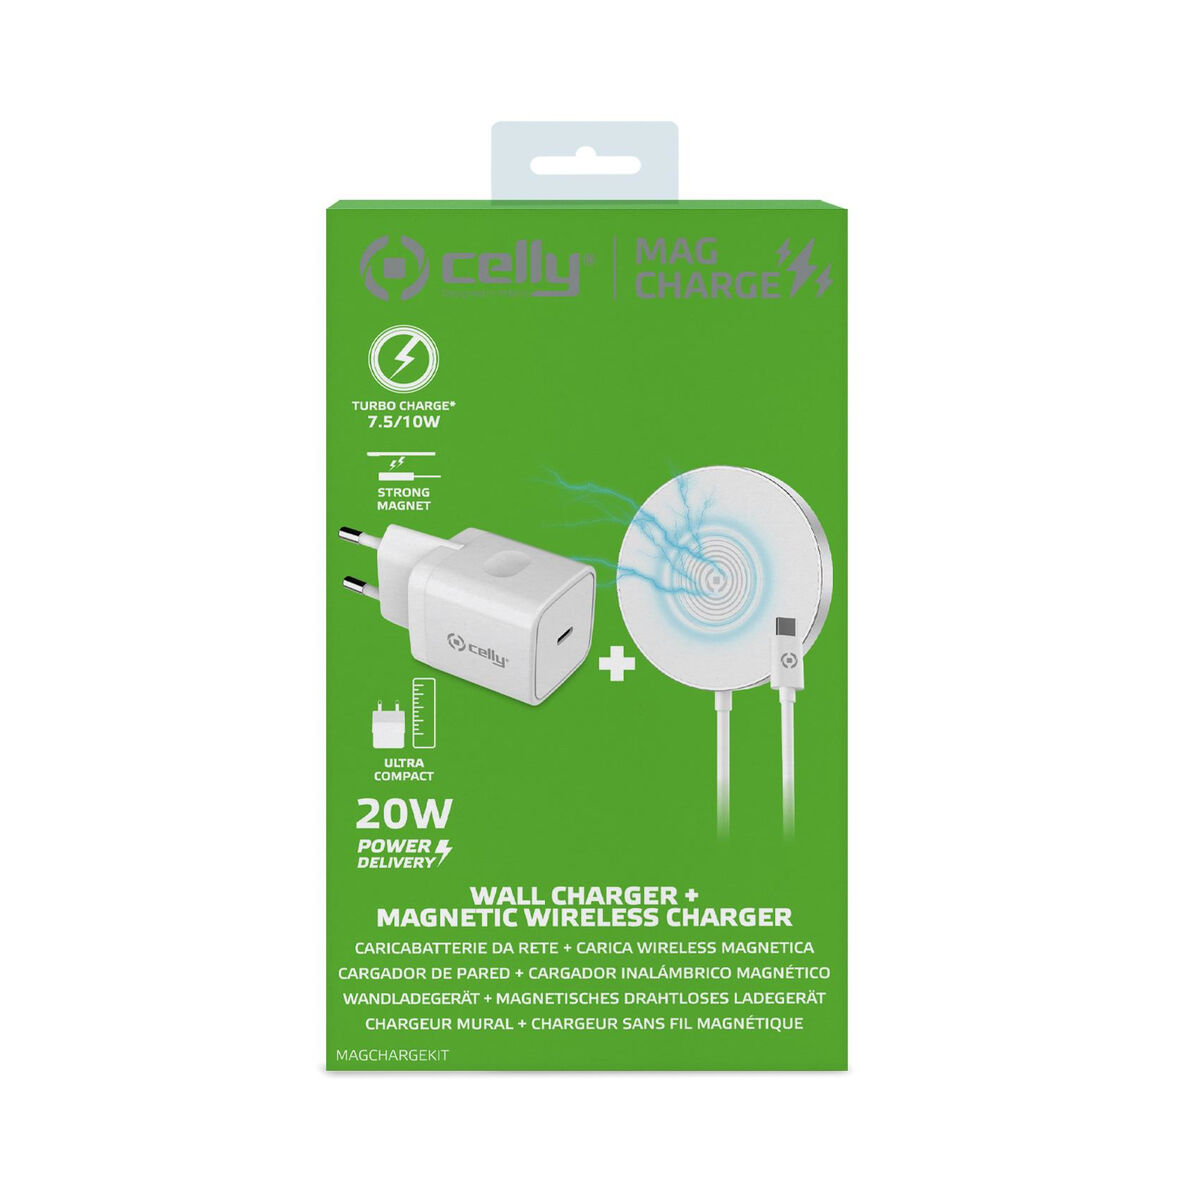 Chargeur mural Celly Magchargekit Blanc 20 W 2100 W